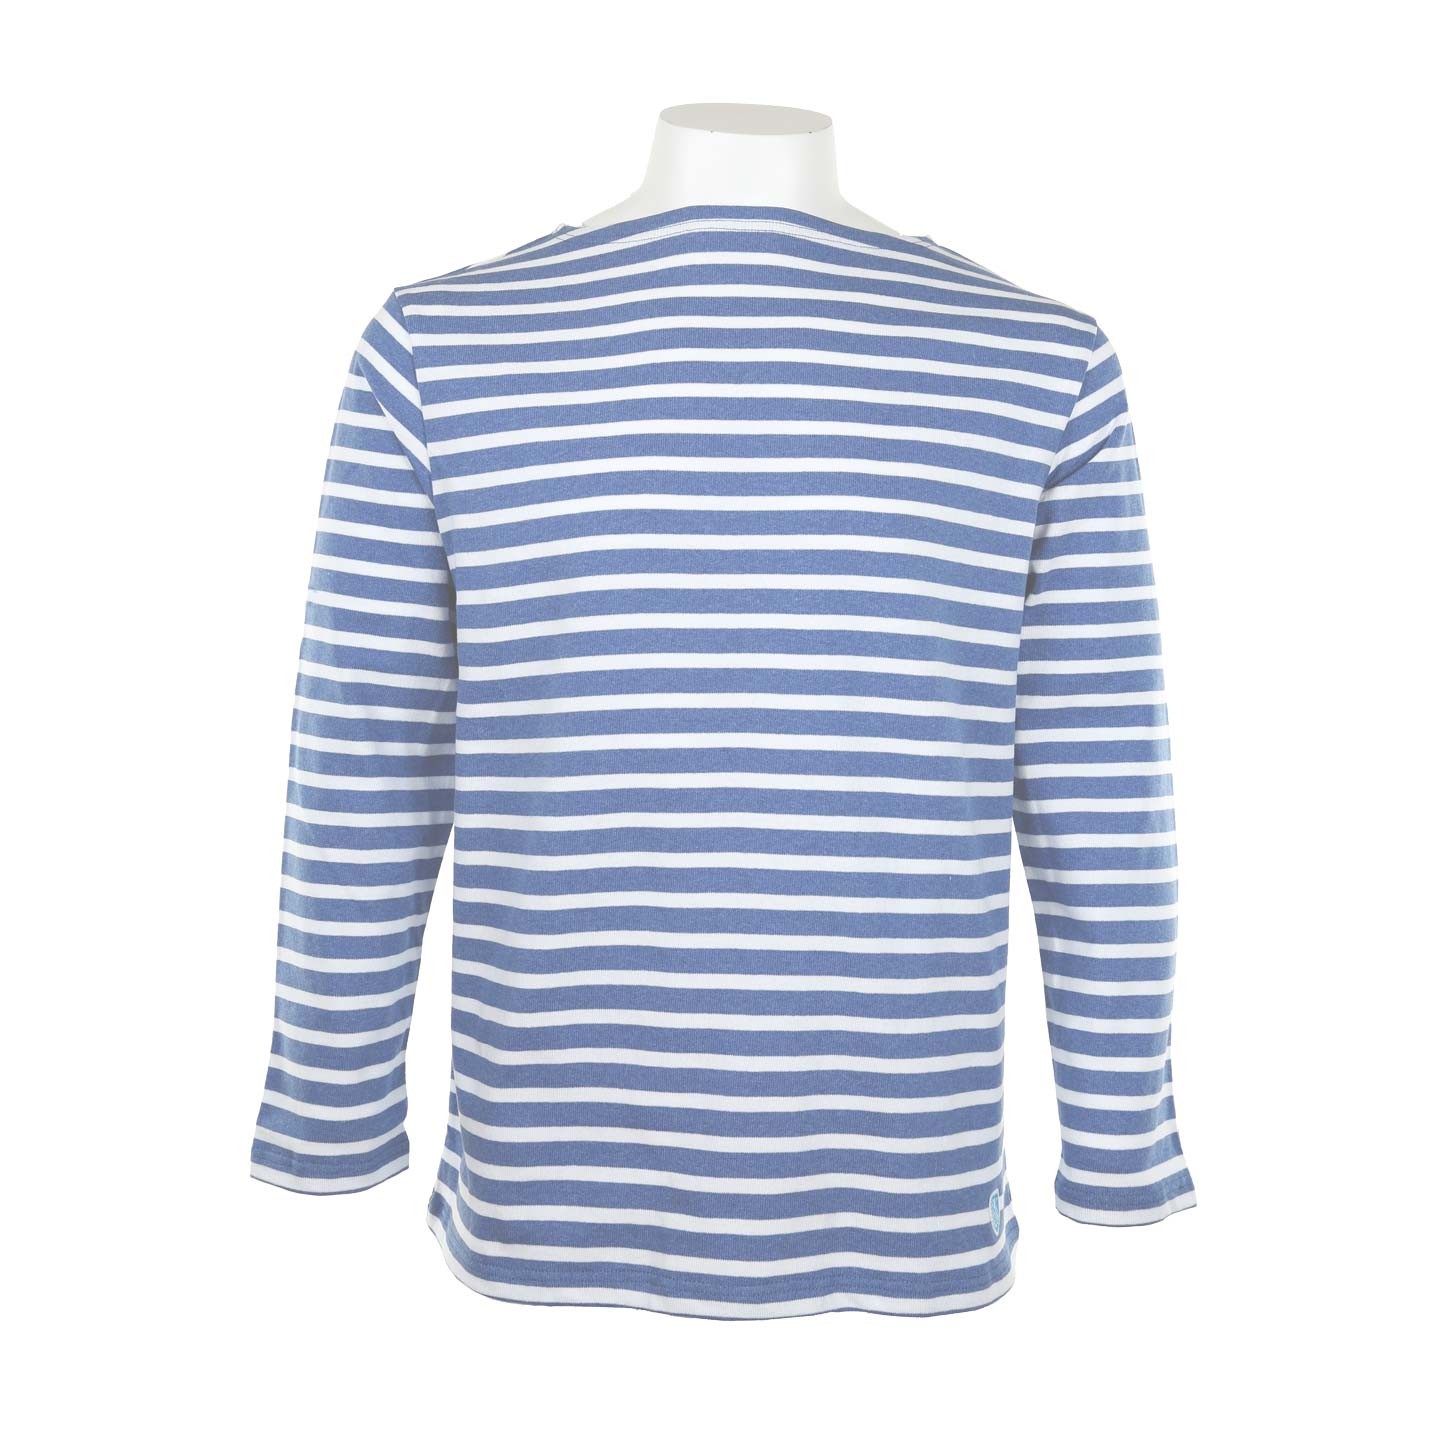 Striped shirt Heather Blue / White, unisex made in France Orcival